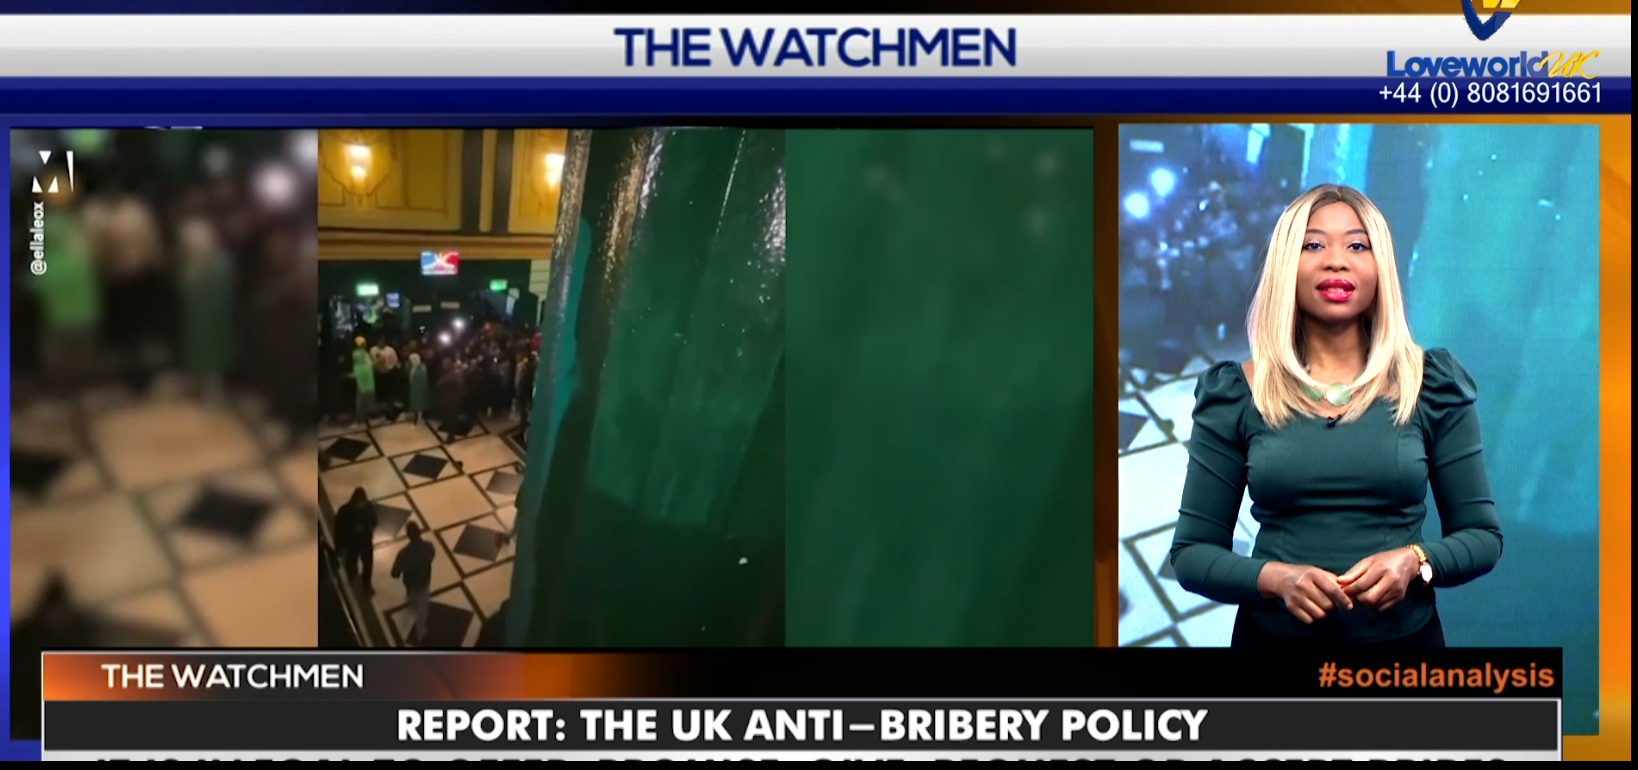 THE WATCHMEN_EP07: THE UK ANTI-BRIBERY POLICY